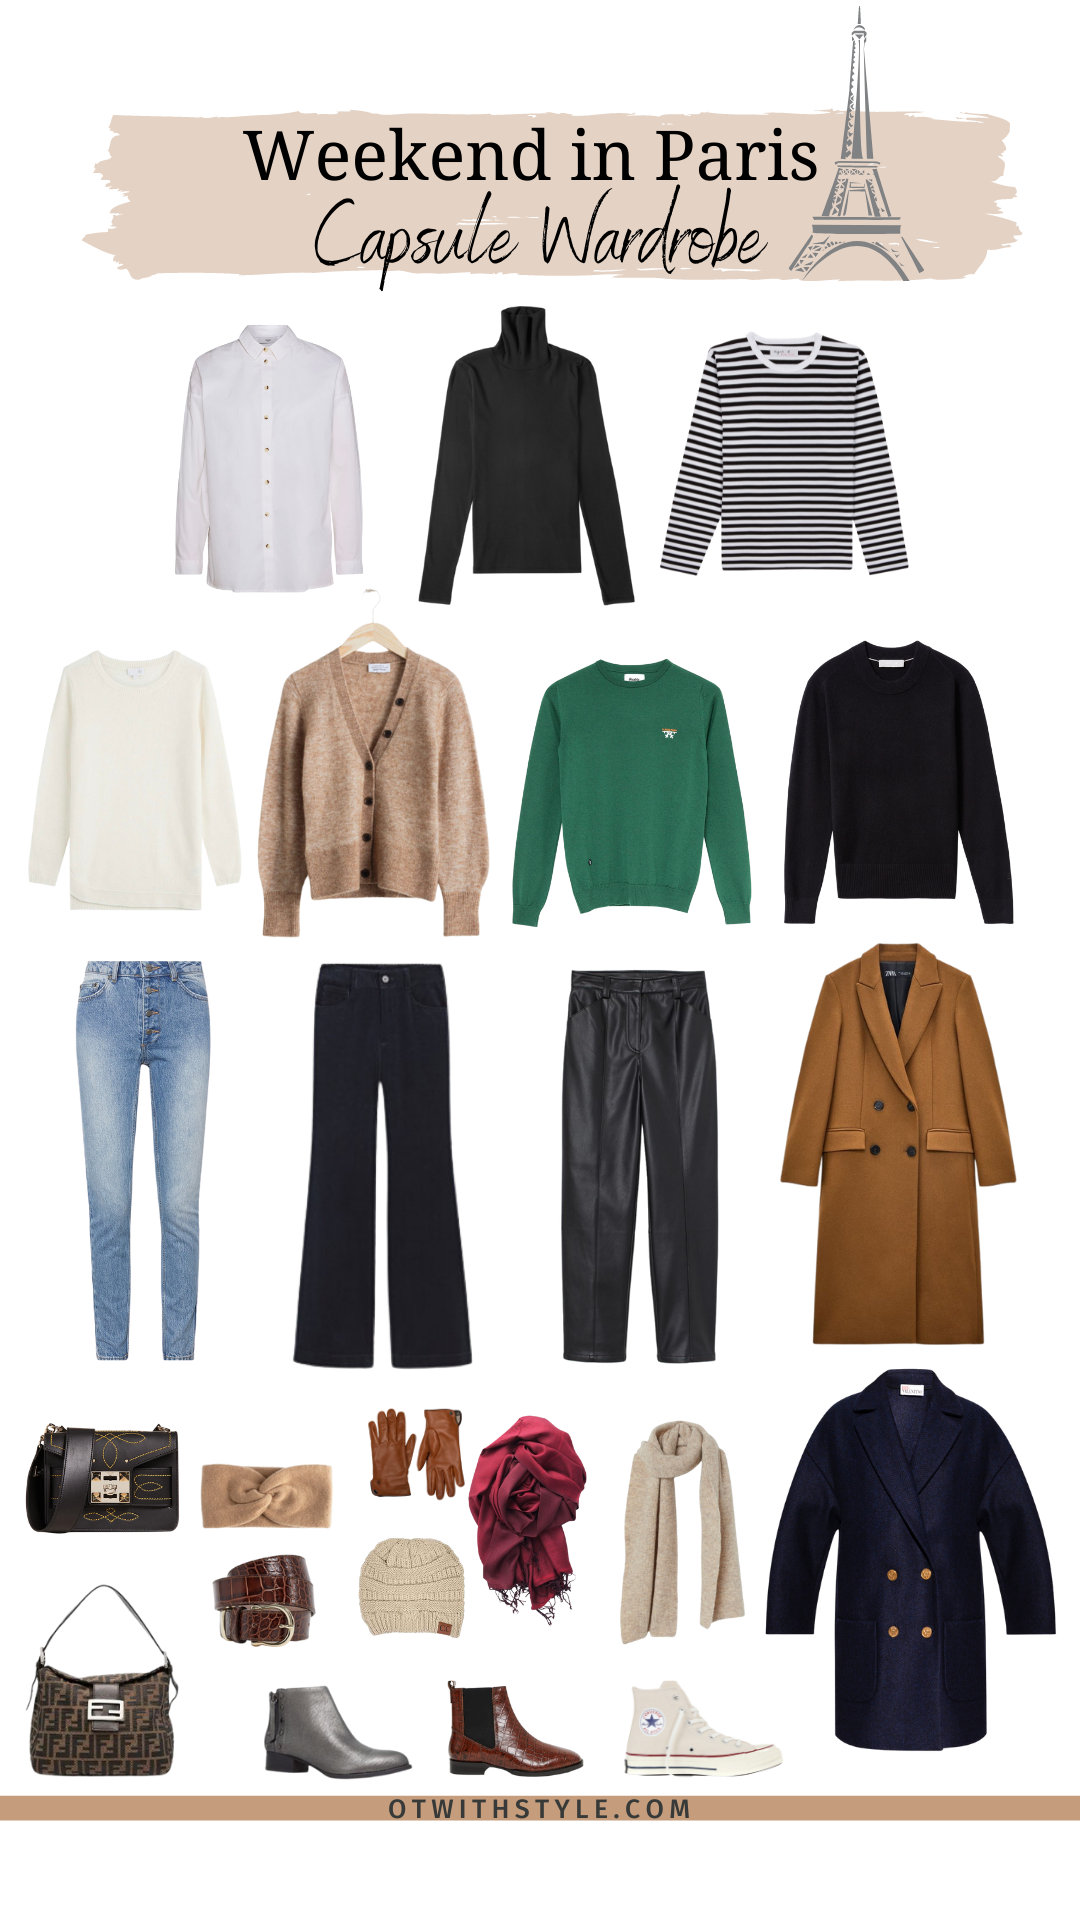 What to wear for a weekend in Paris?